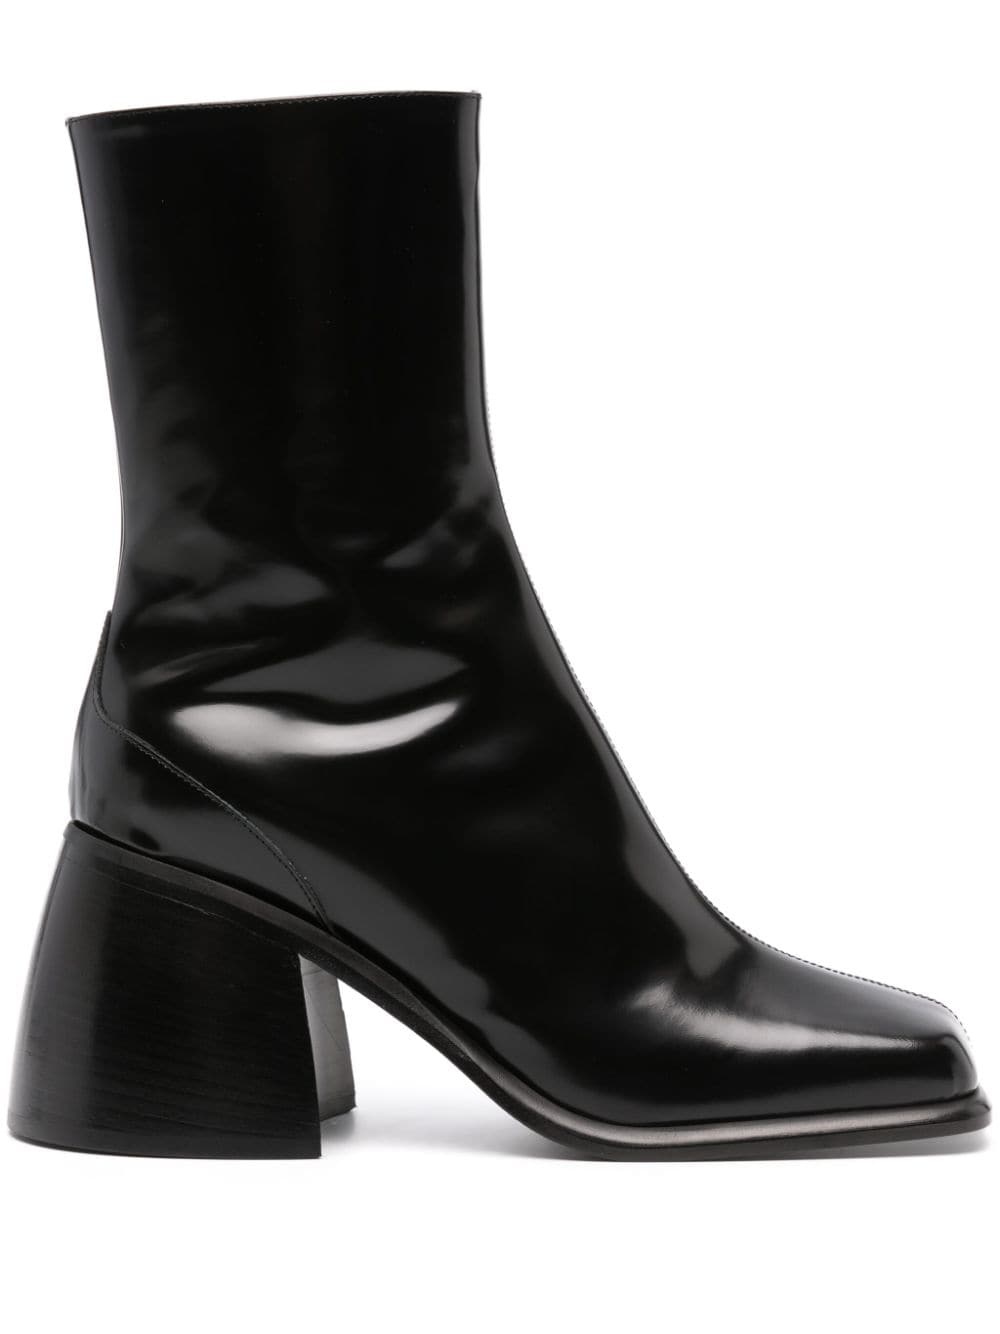 80mm square-toe leather boots - 1